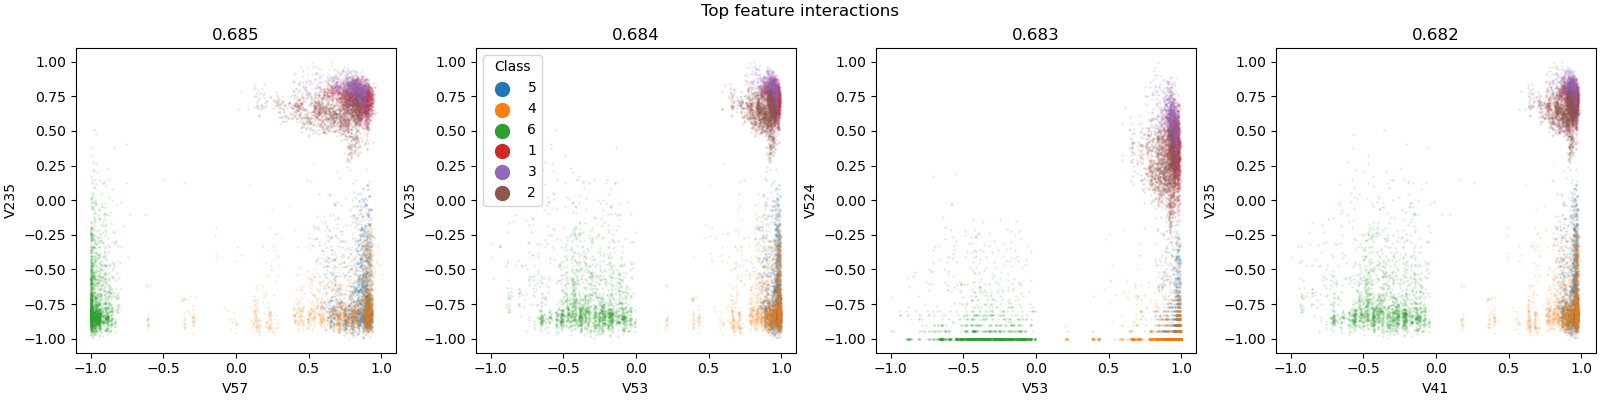 Top feature interactions, 0.685, 0.684, 0.683, 0.682